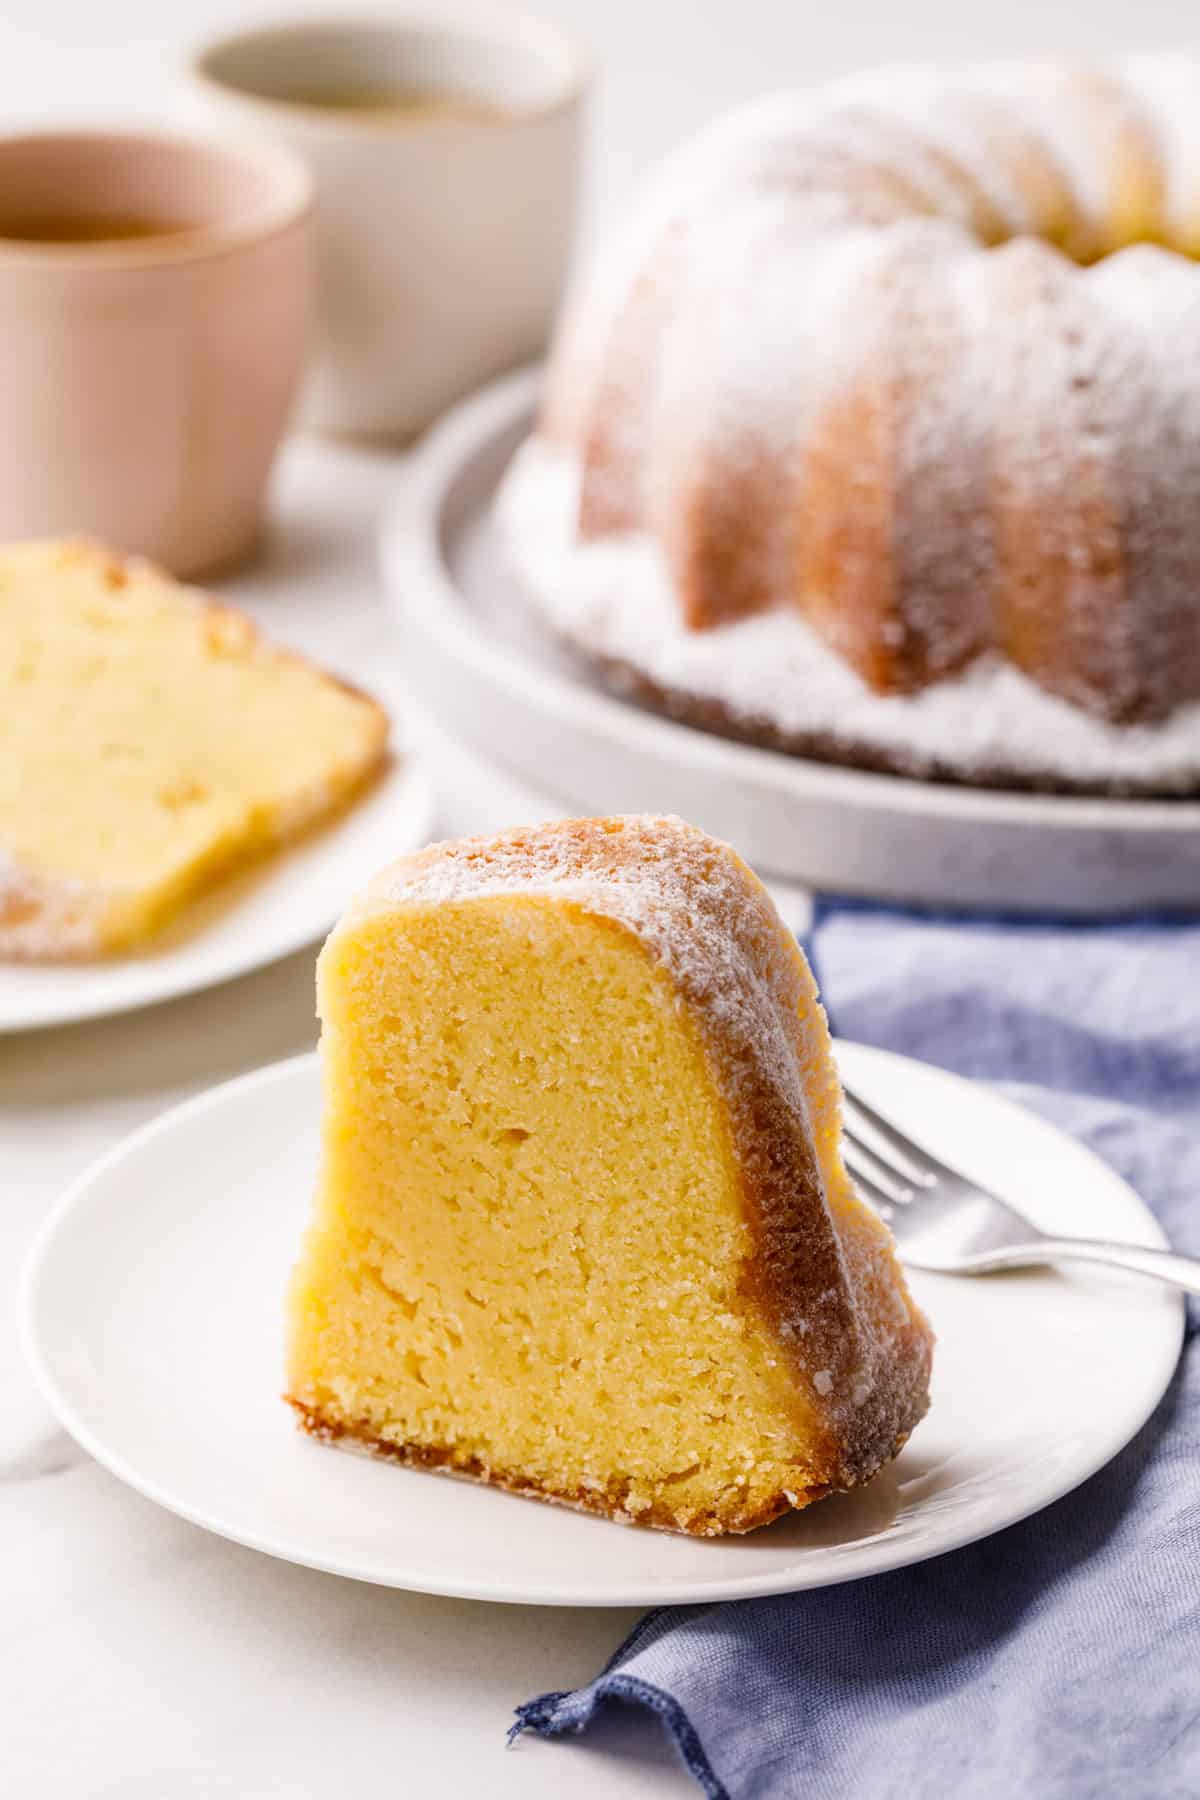 slice of kentucky butter cake served on a white round plate with a silver fork